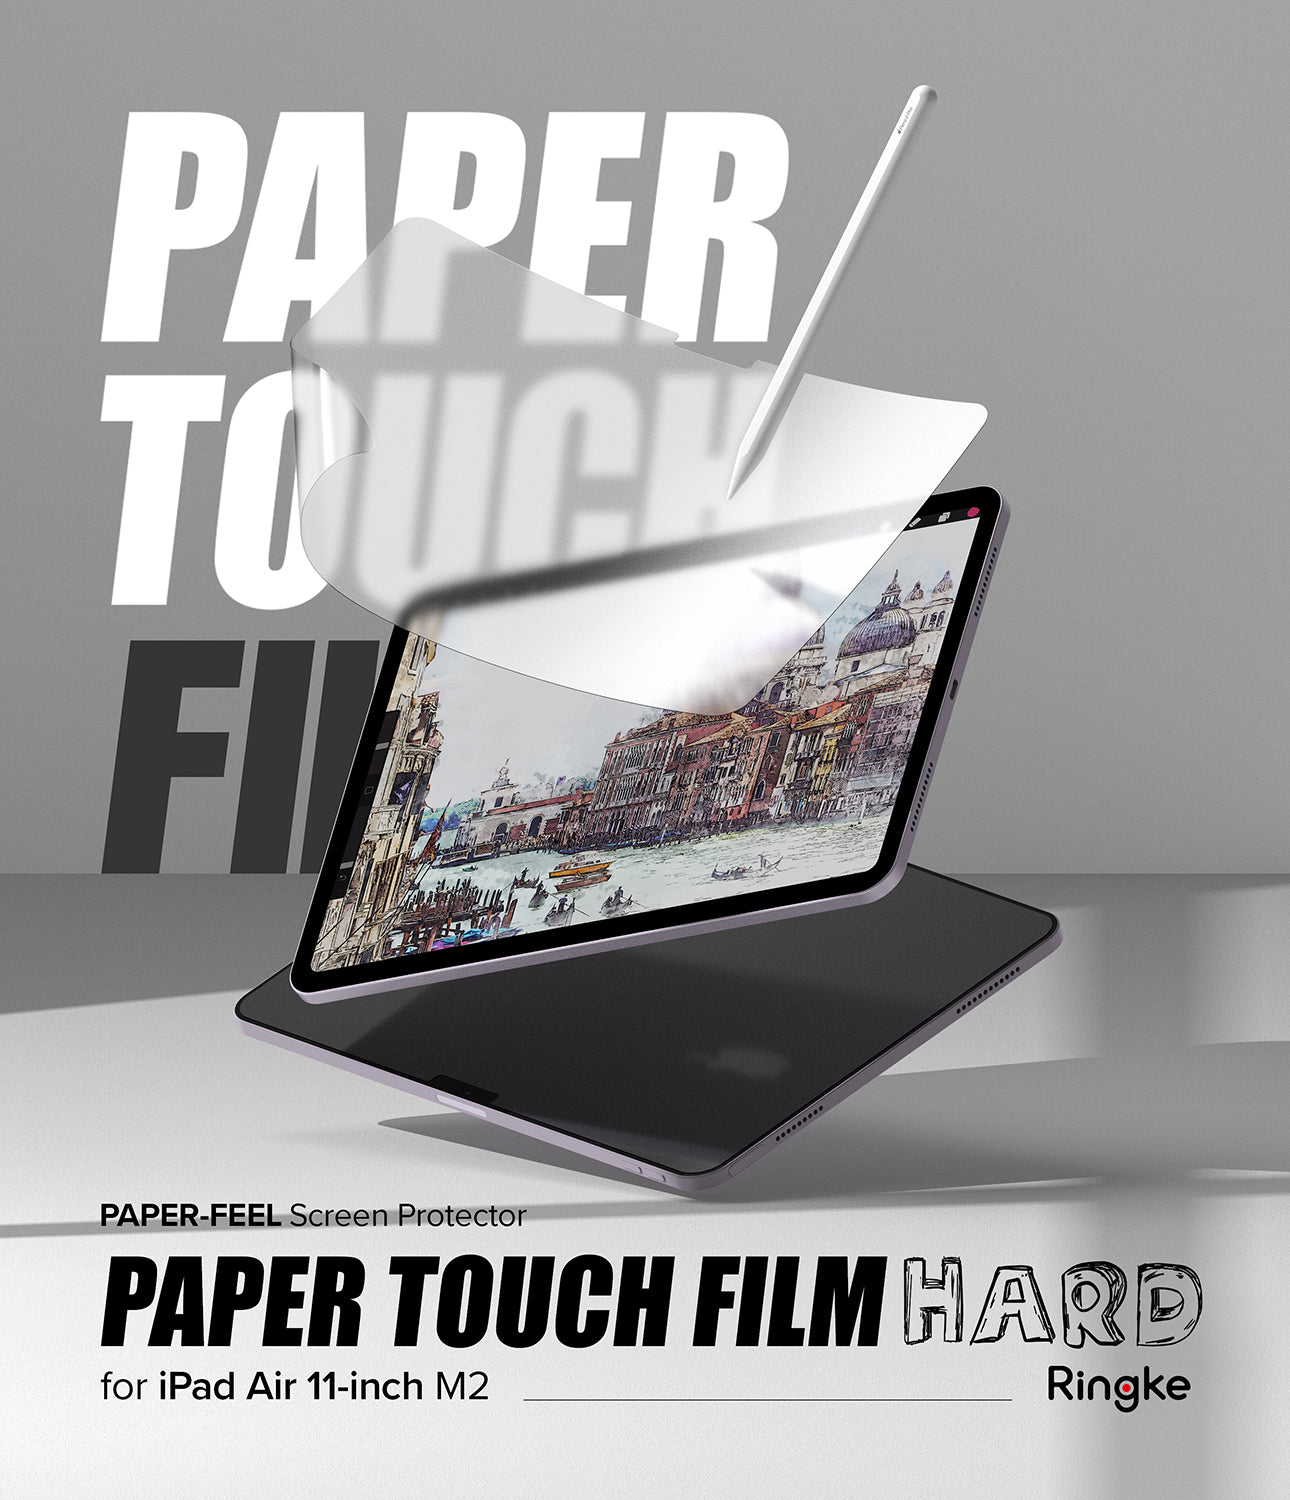 iPad Air 11" (M2) Screen Protector | Paper Touch Film - By Ringke